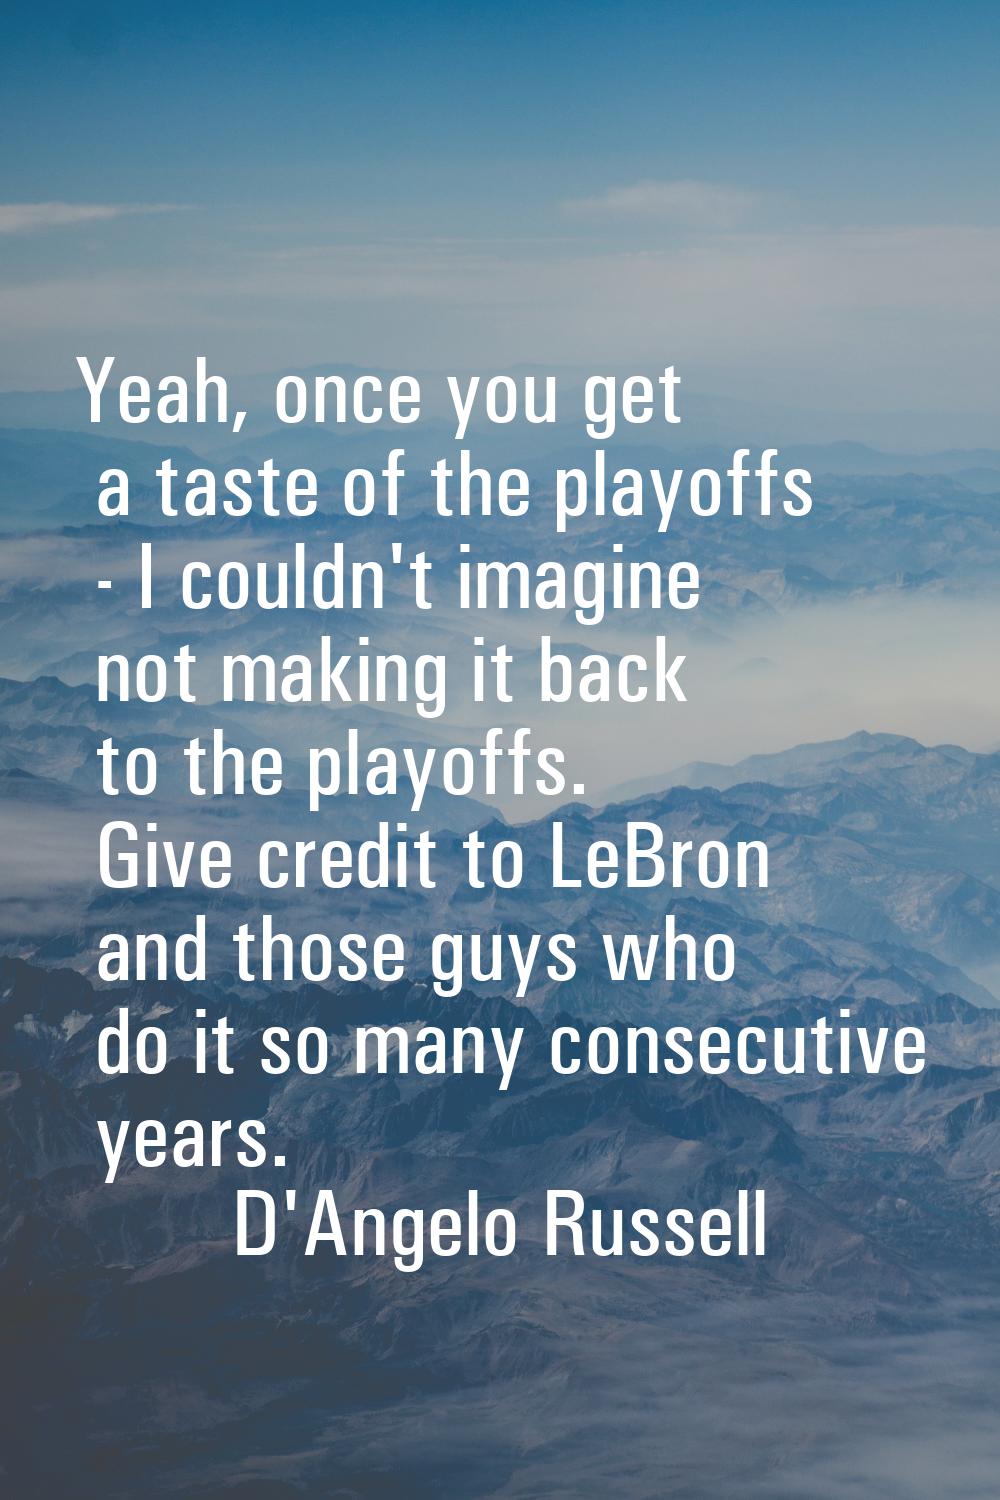 Yeah, once you get a taste of the playoffs - I couldn't imagine not making it back to the playoffs.